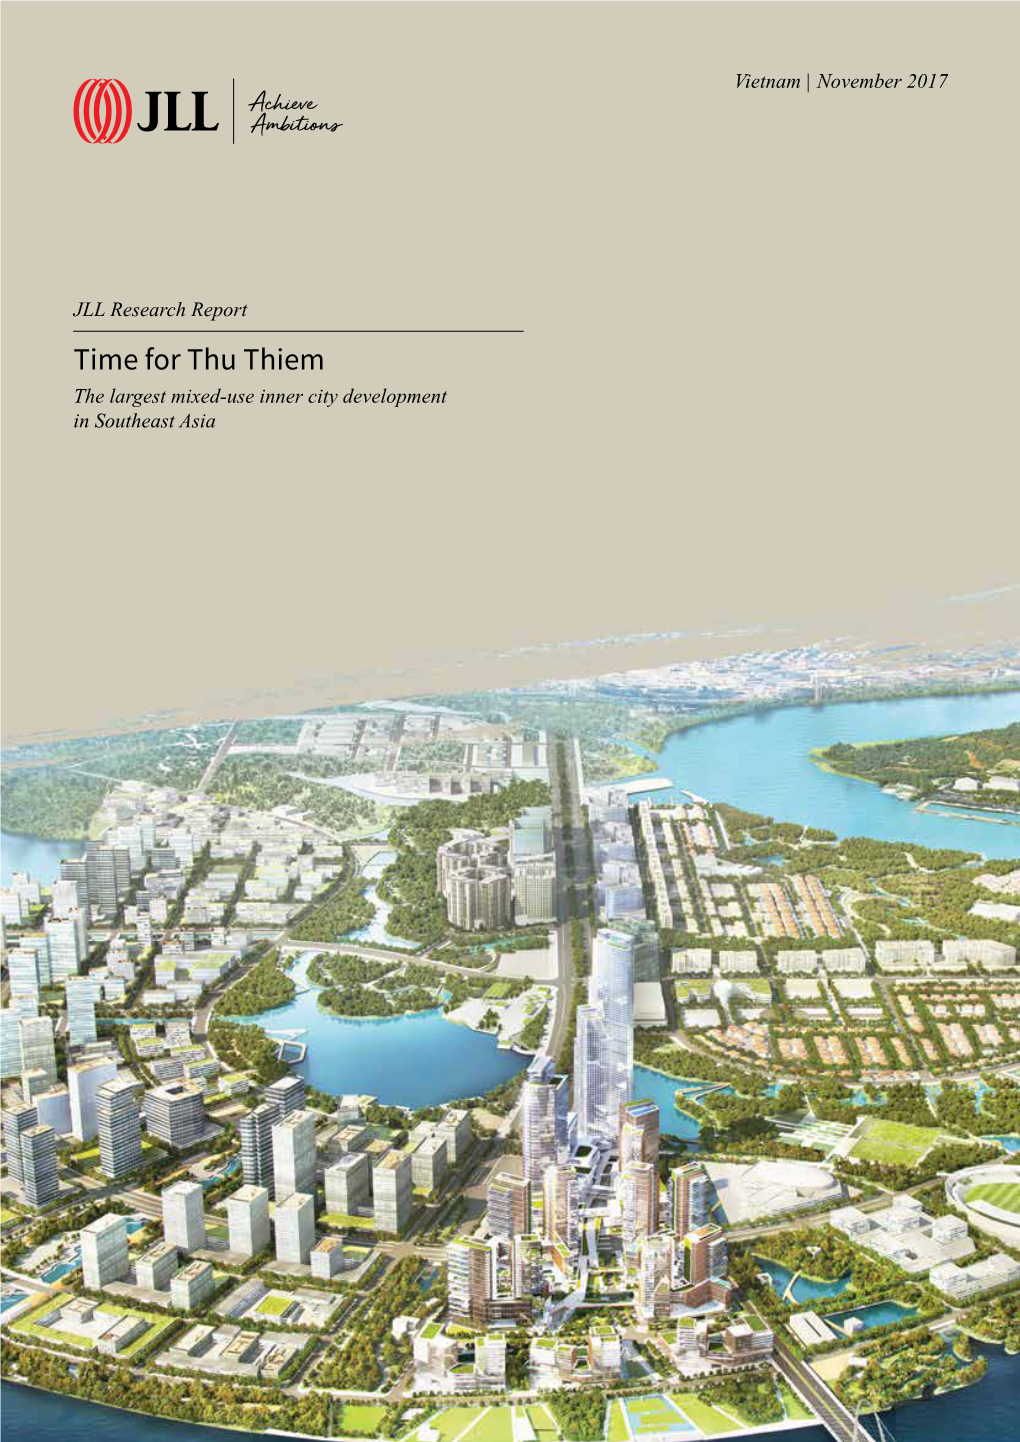 Time for Thu Thiem the Largest Mixed-Use Inner City Development in Southeast Asia Key Takeaways from This Report